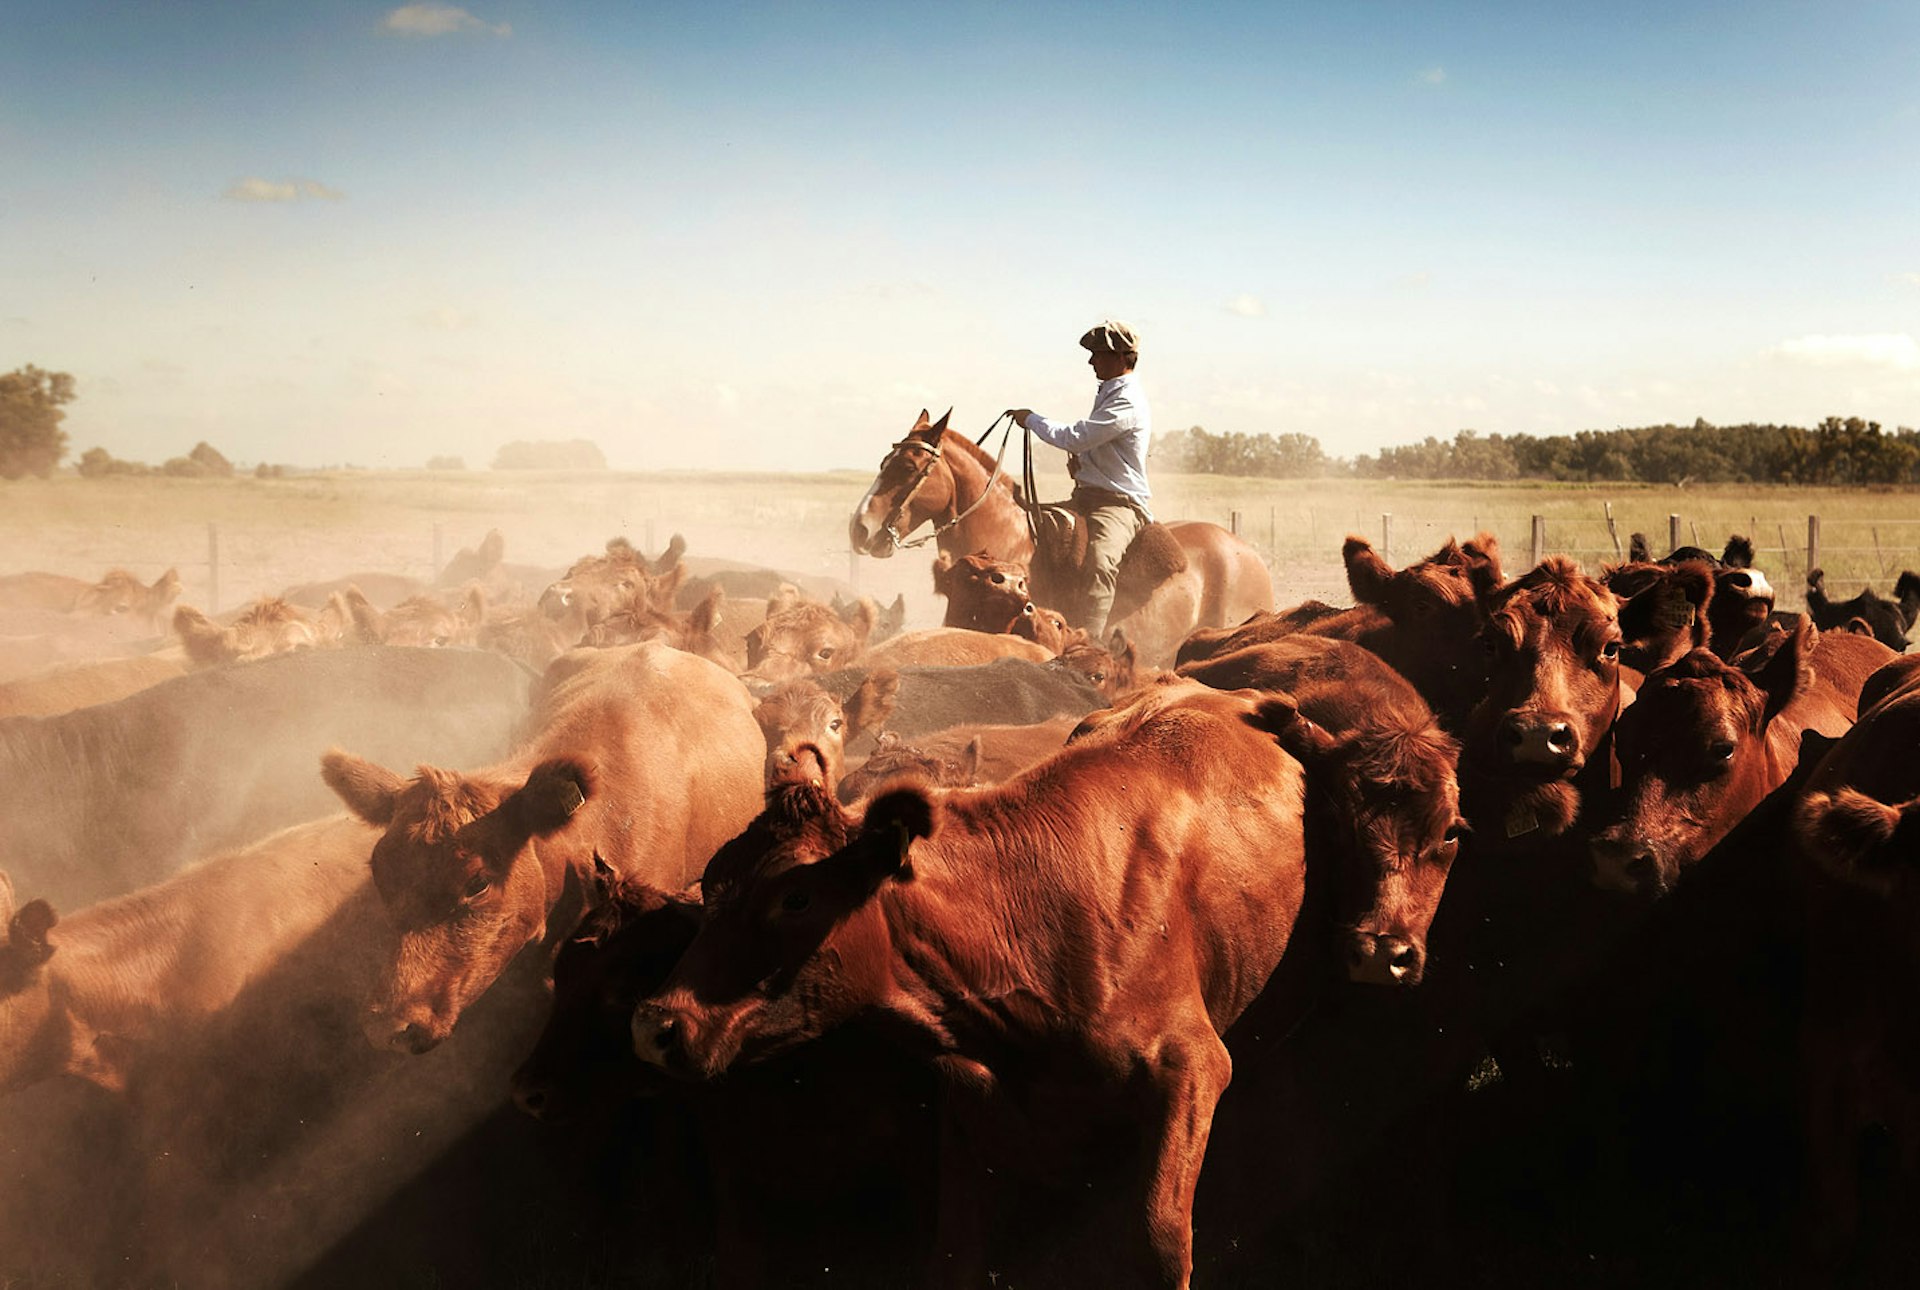 A gaucho (horserider) rides a horse among a group of cows in a dusty countryside landscape